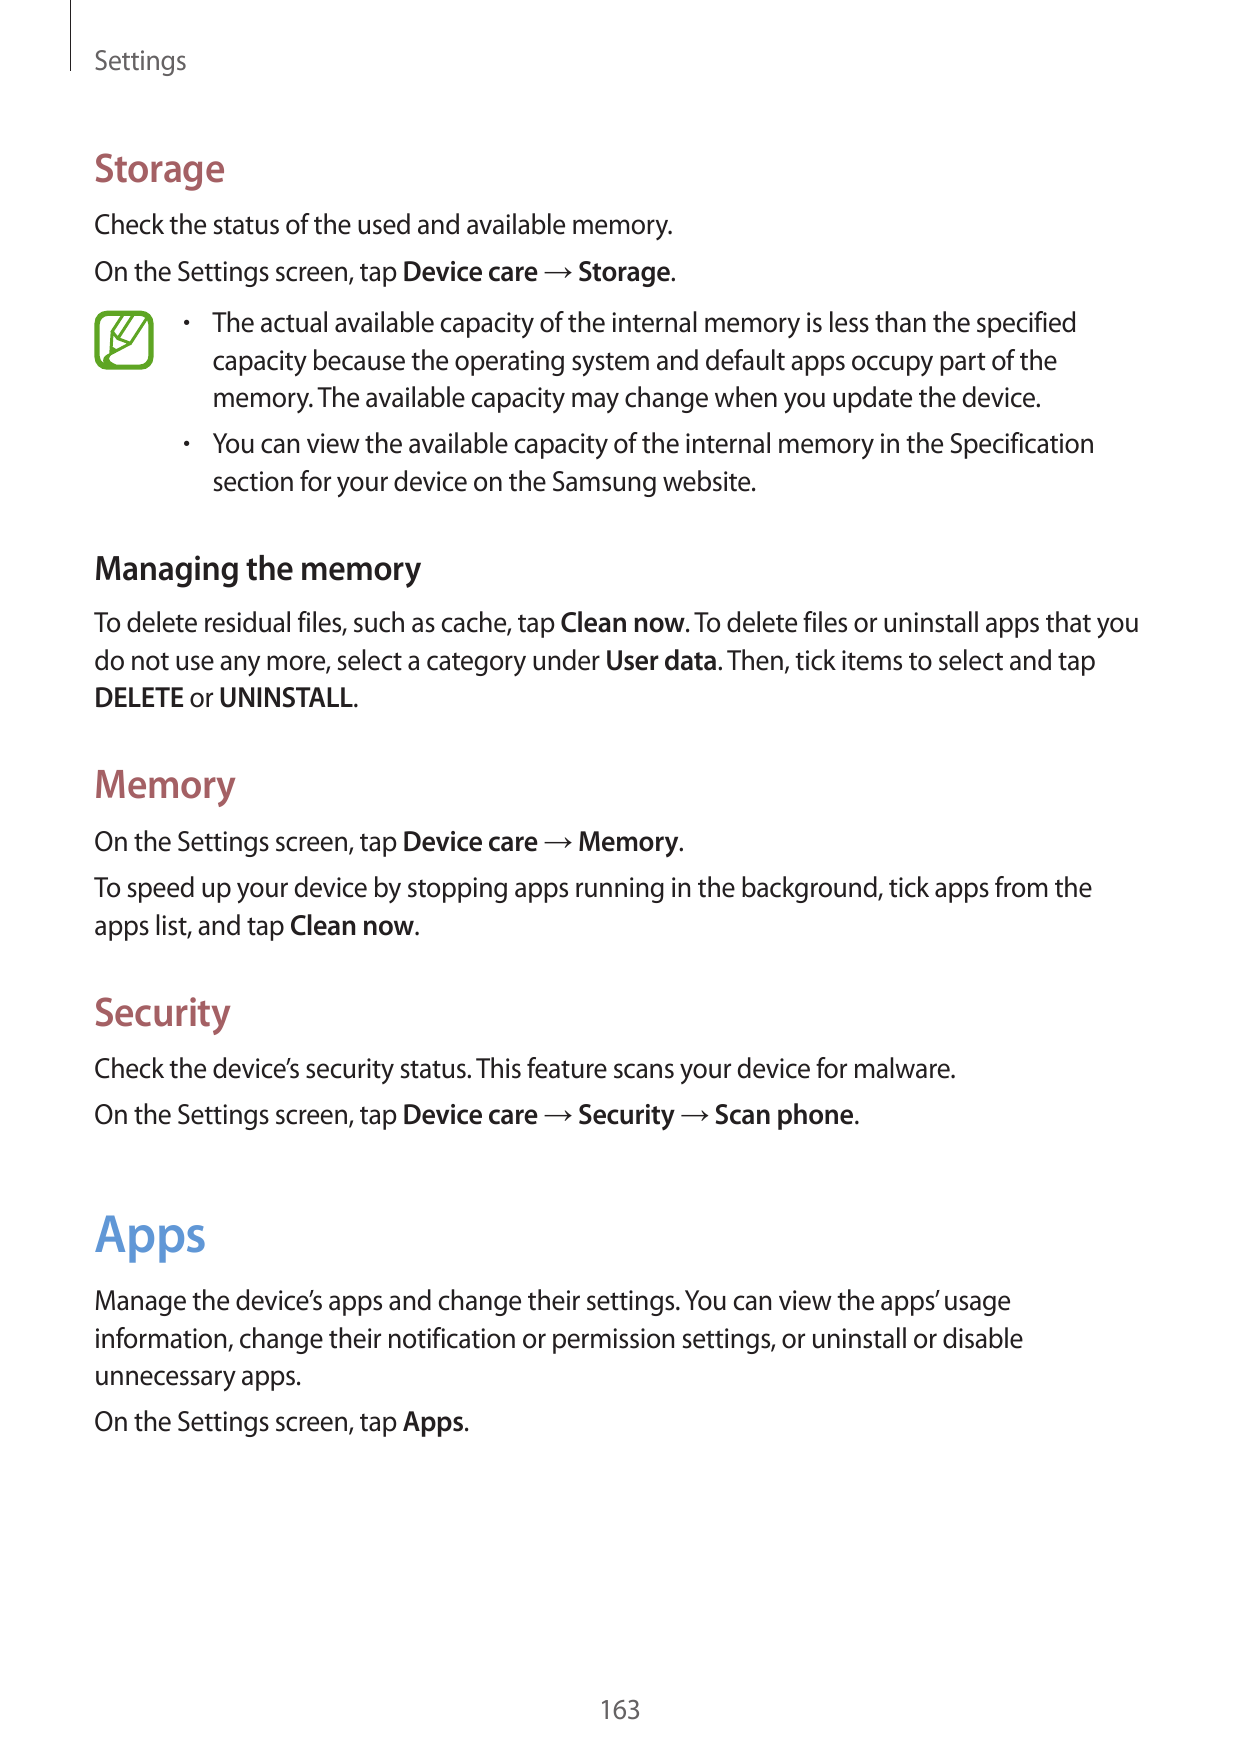 SettingsStorageCheck the status of the used and available memory.On the Settings screen, tap Device care → Storage.• The actual 